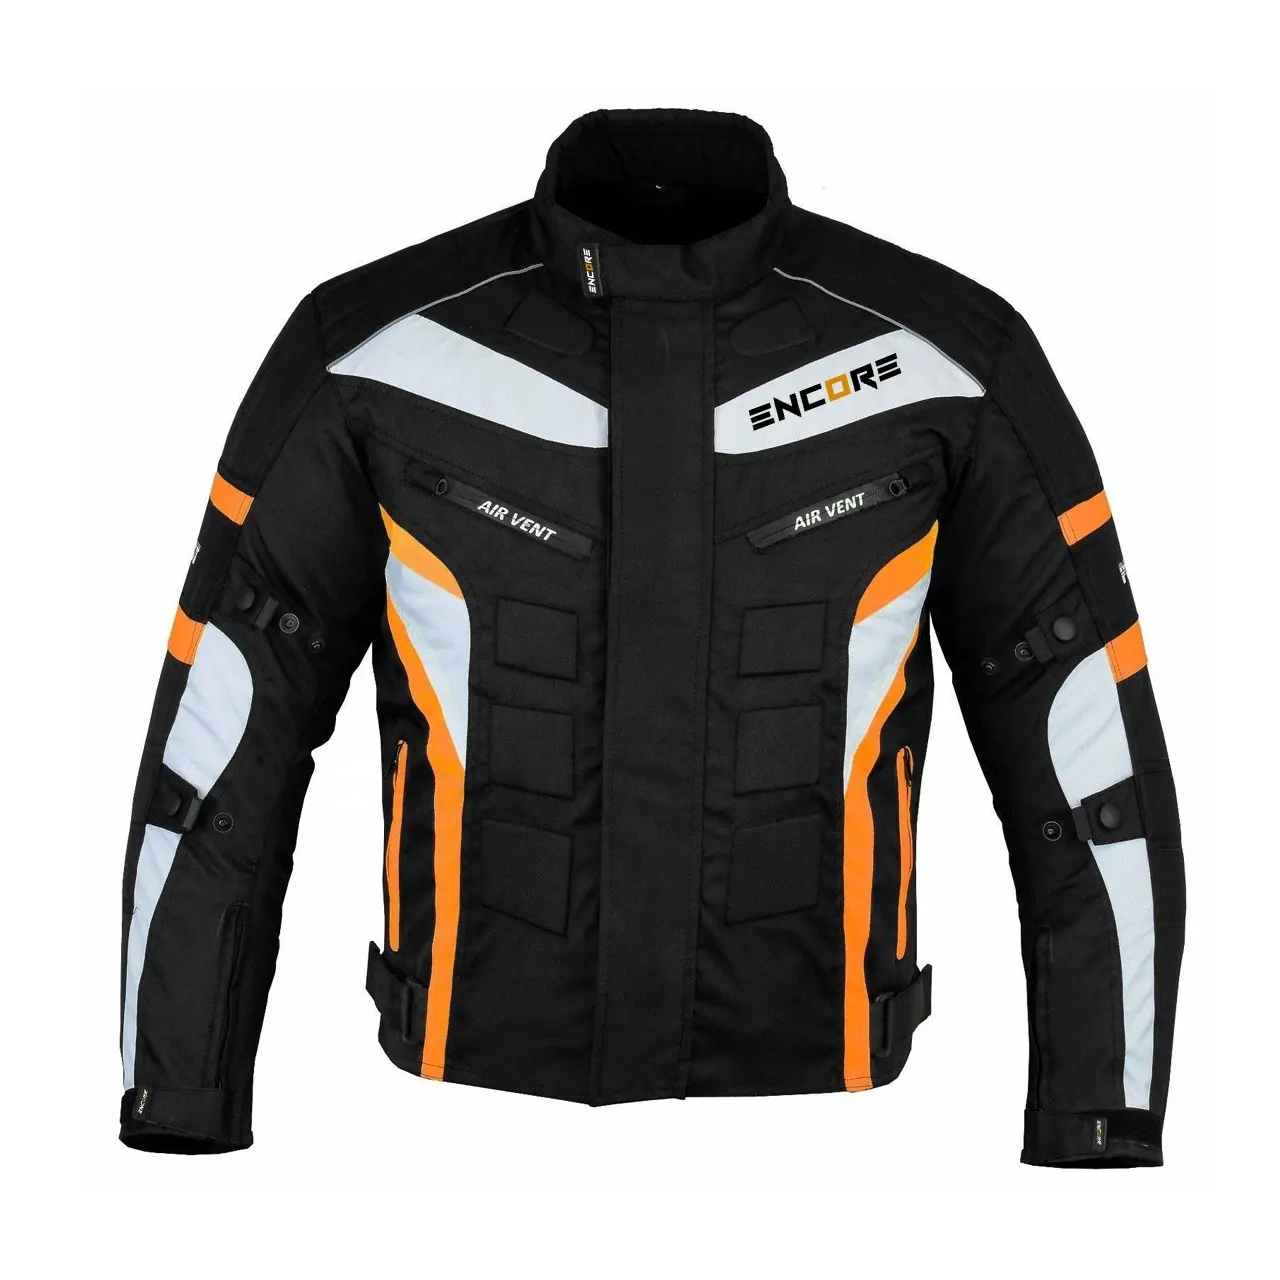 2020 LATEST DESIGNED MOTO RACING CORDURA MOTORBIKE JACKET WITH WATERPROOF & BREATHABLE MEMBRANE WITH CE APPROVED PROTECTIONS